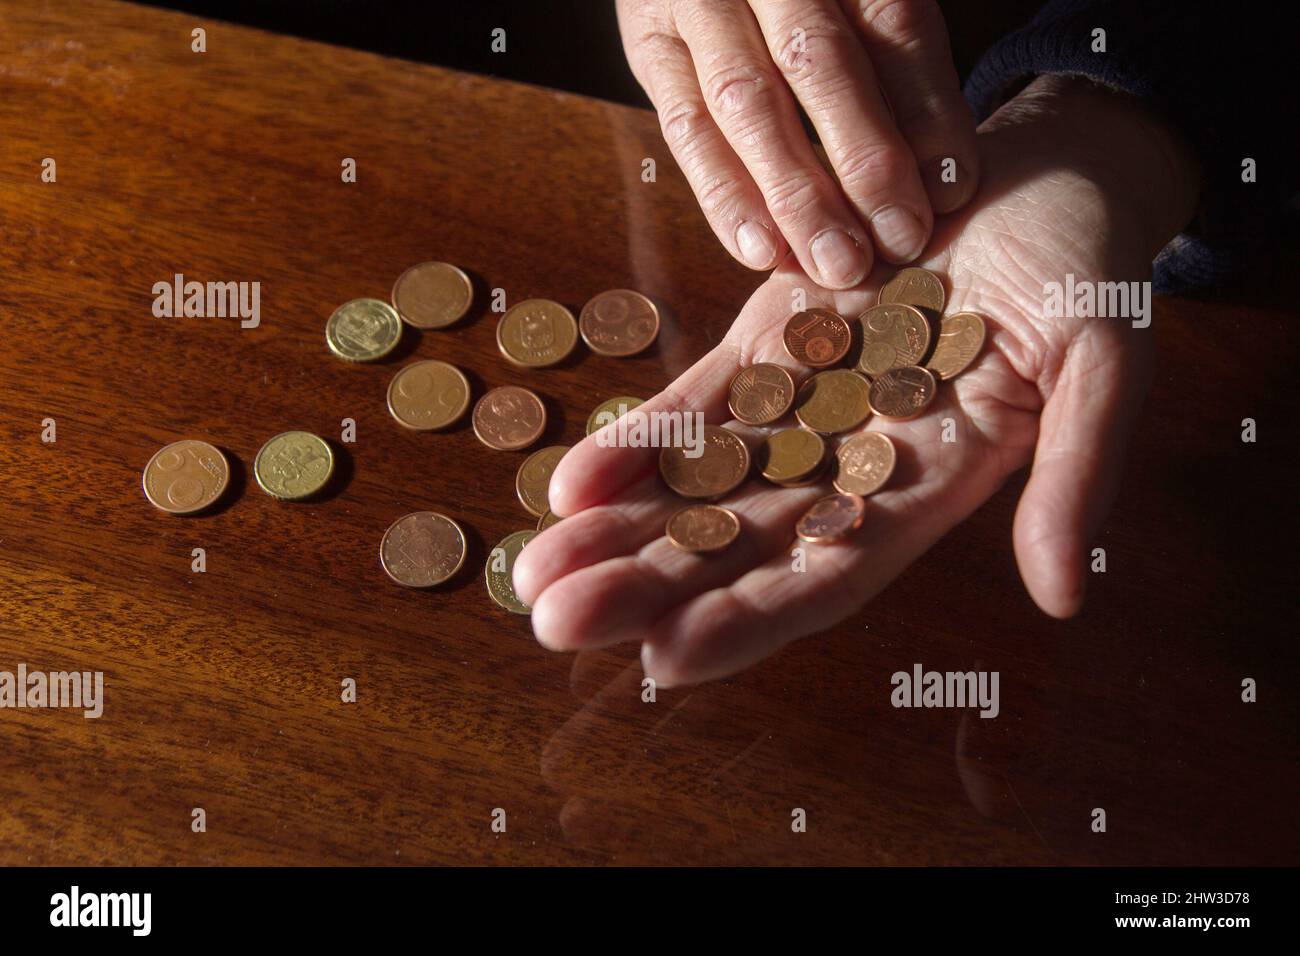 Wrinkled hands of elderly woman counting coins Stock Photo